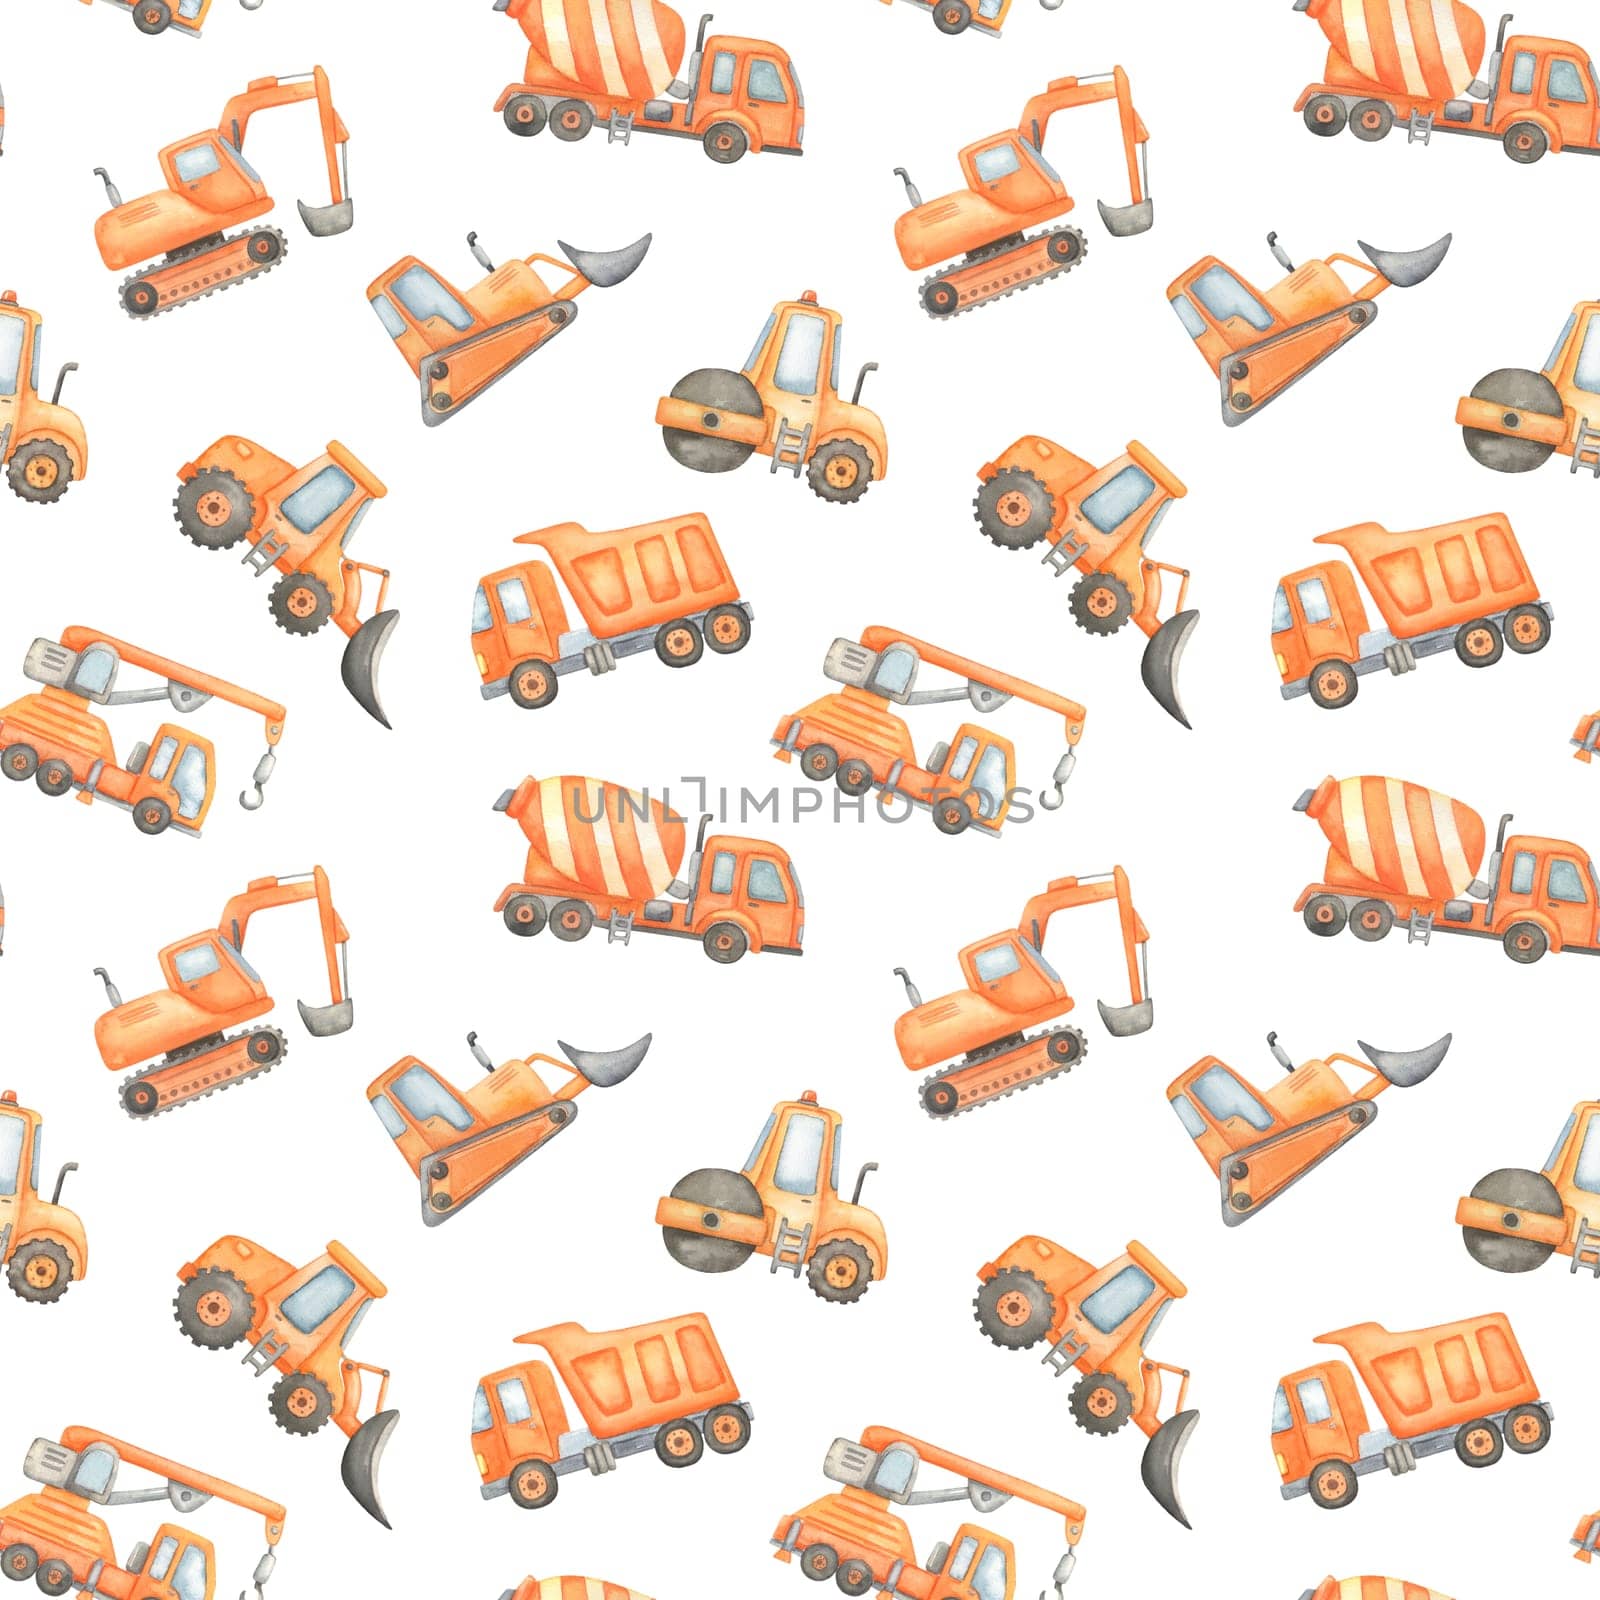 Watercolor seamless pattern with construction equipment on white background. Pattern with orange machines for children's textiles and packaging. Excavator, concrete mixer and truck.